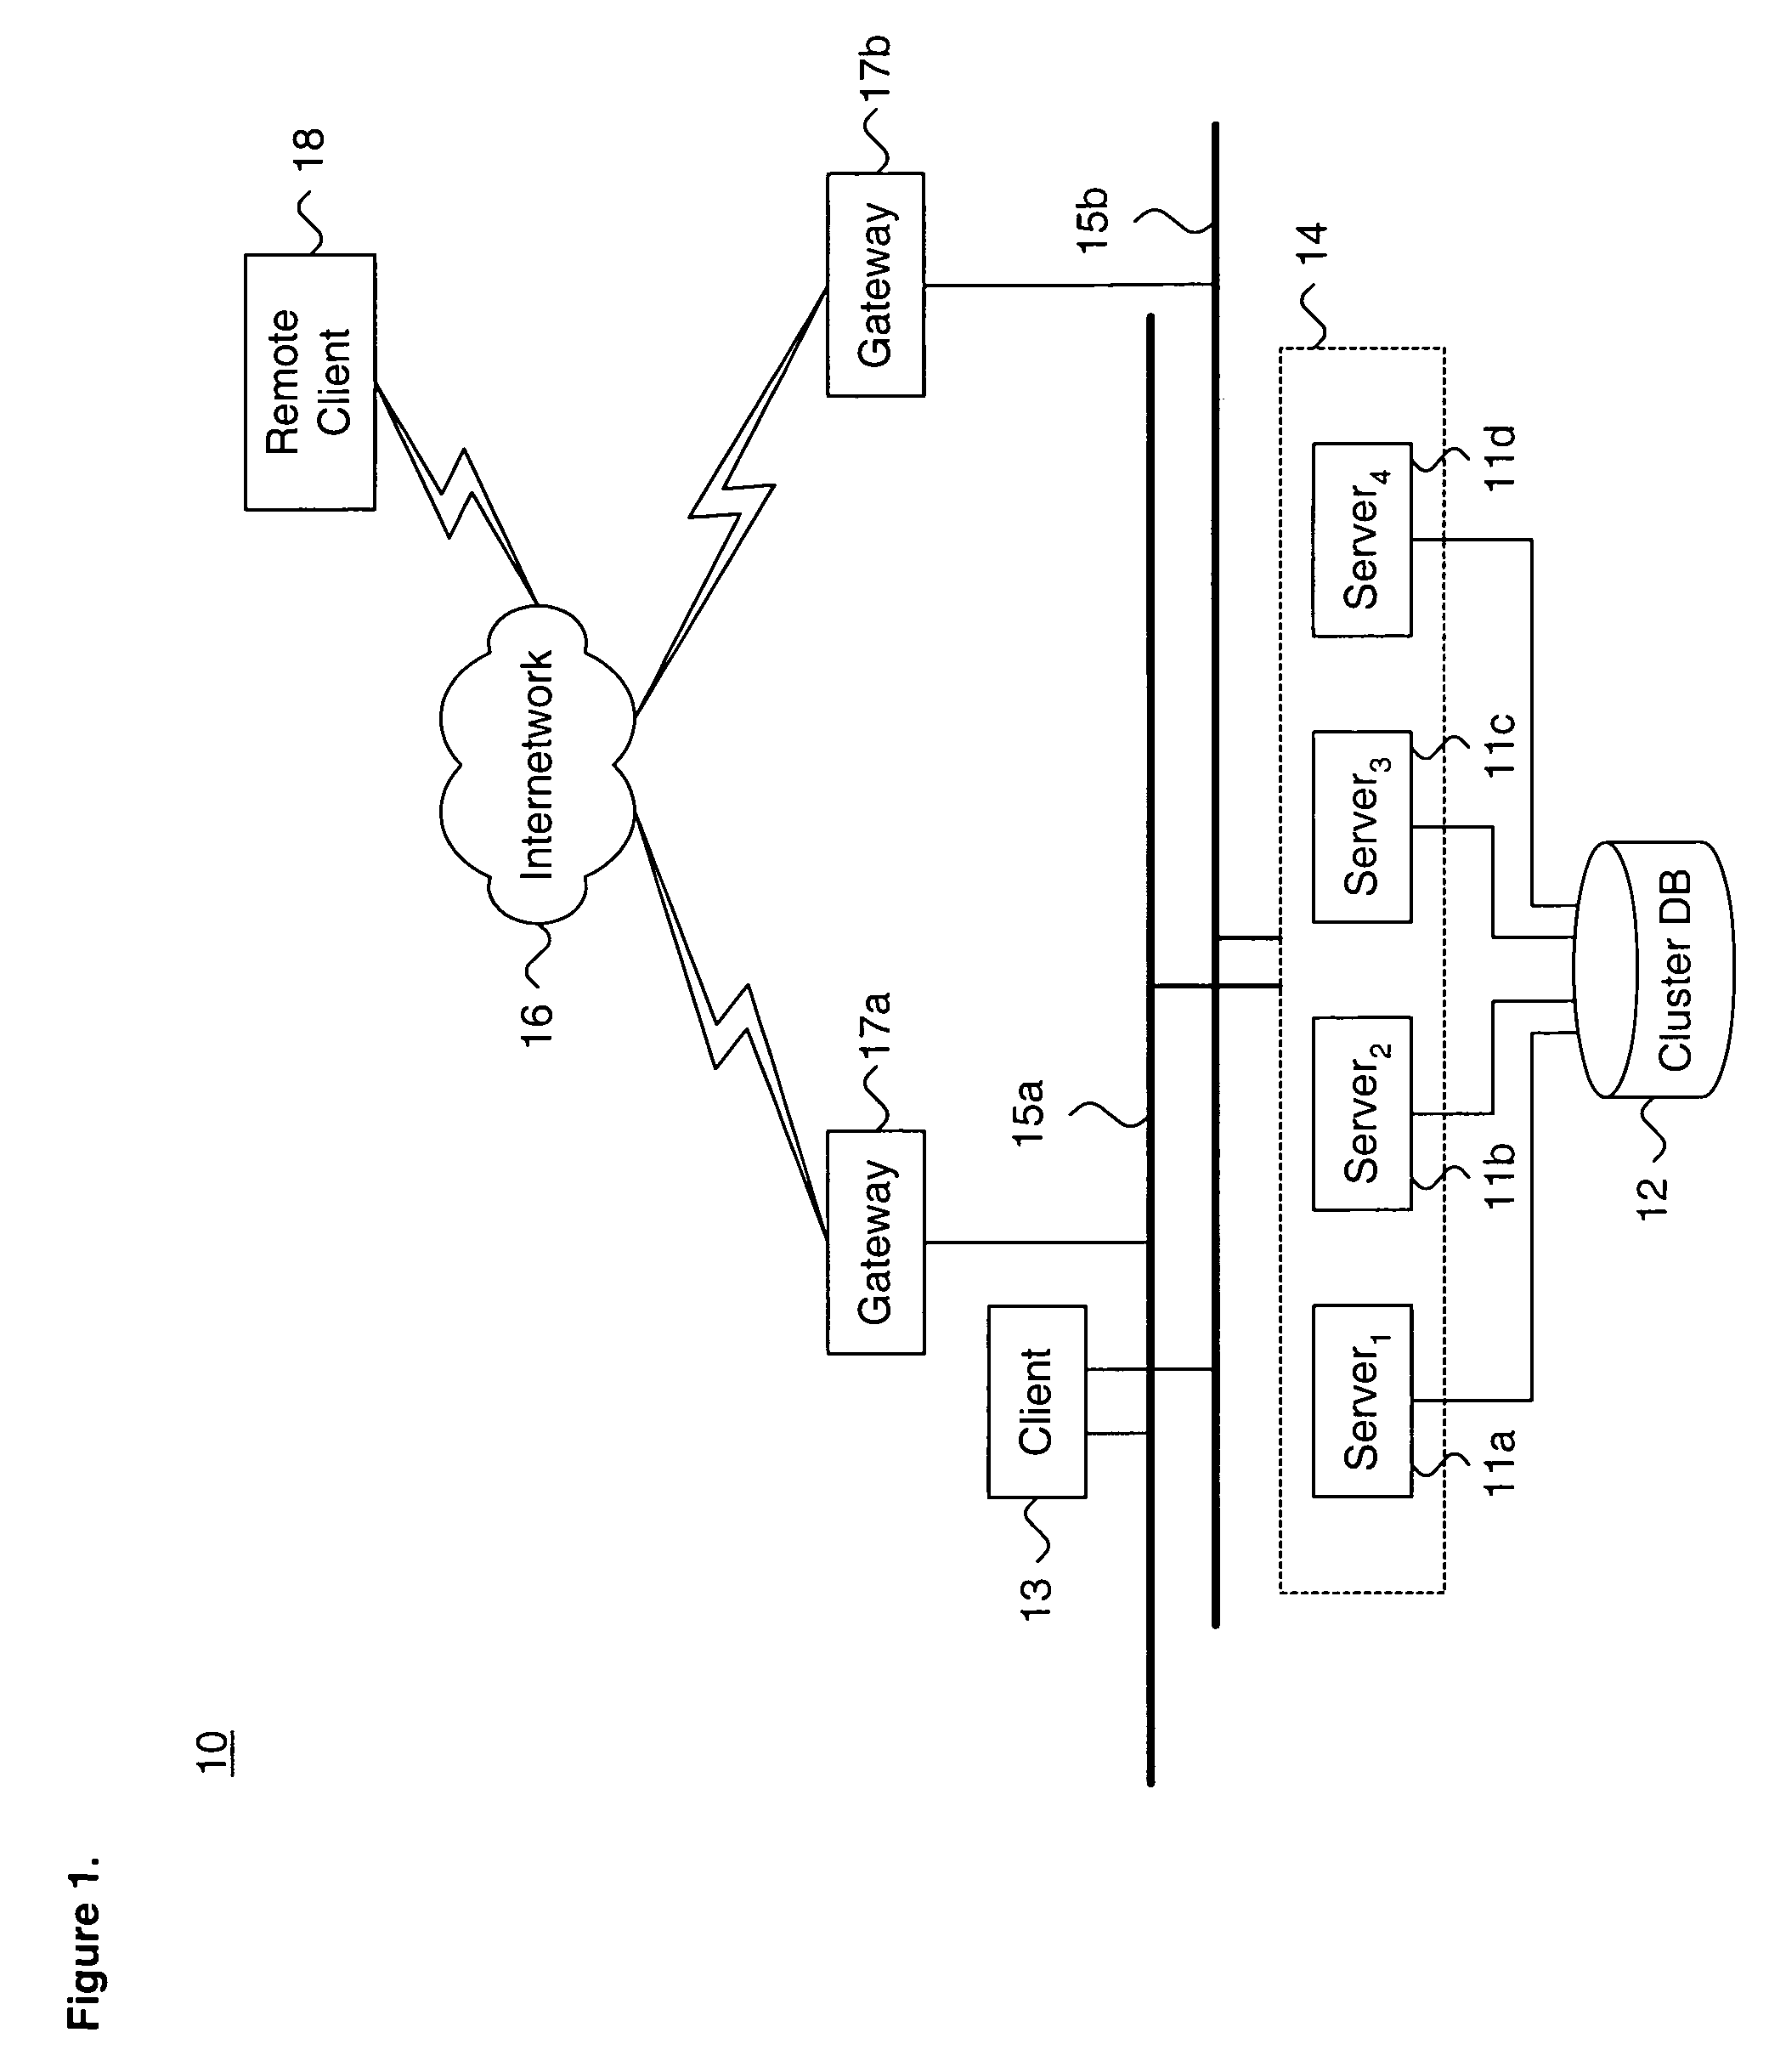 System and method for providing cooperative resource groups for high availability applications